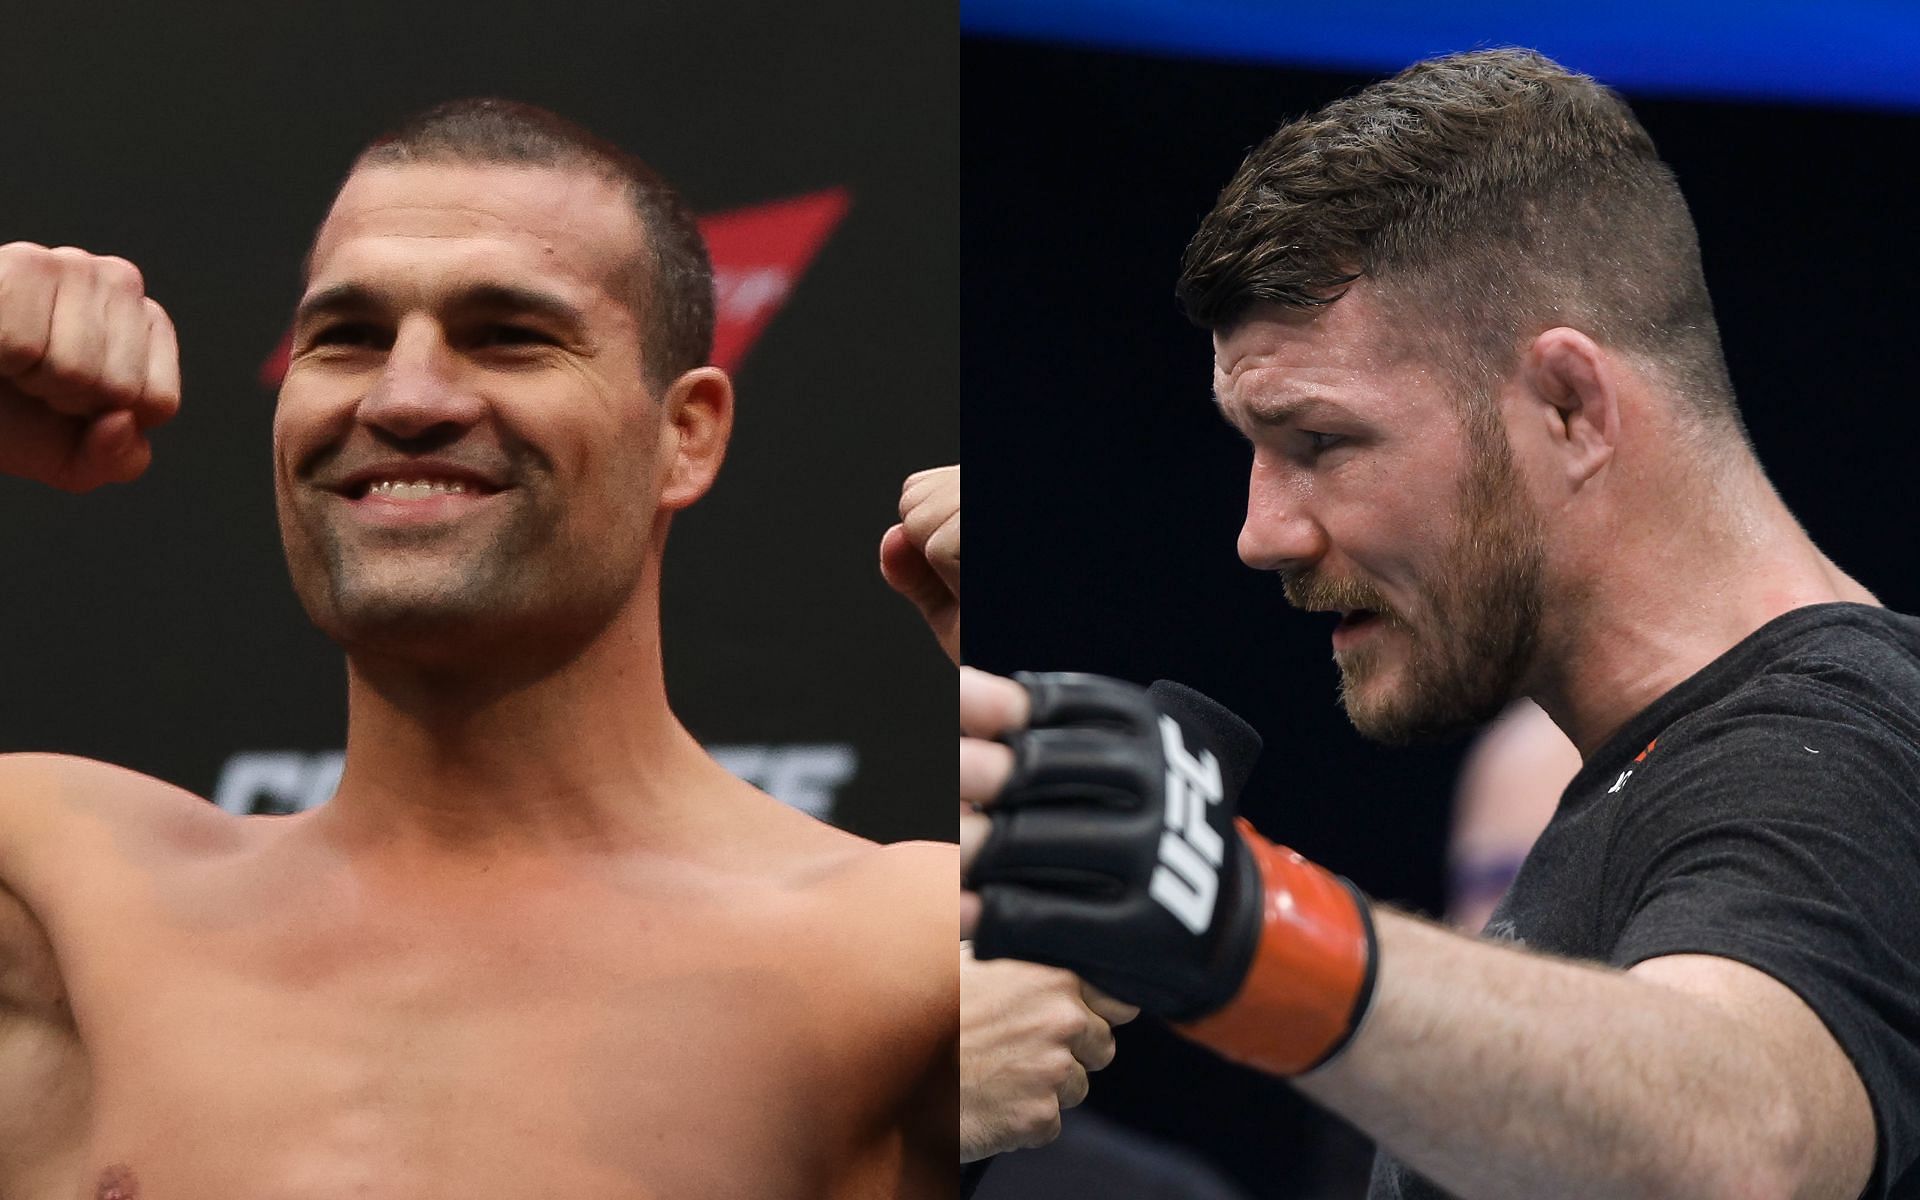 Mauricio Rua (left) and Michael Bisping (right) (Image via Getty)